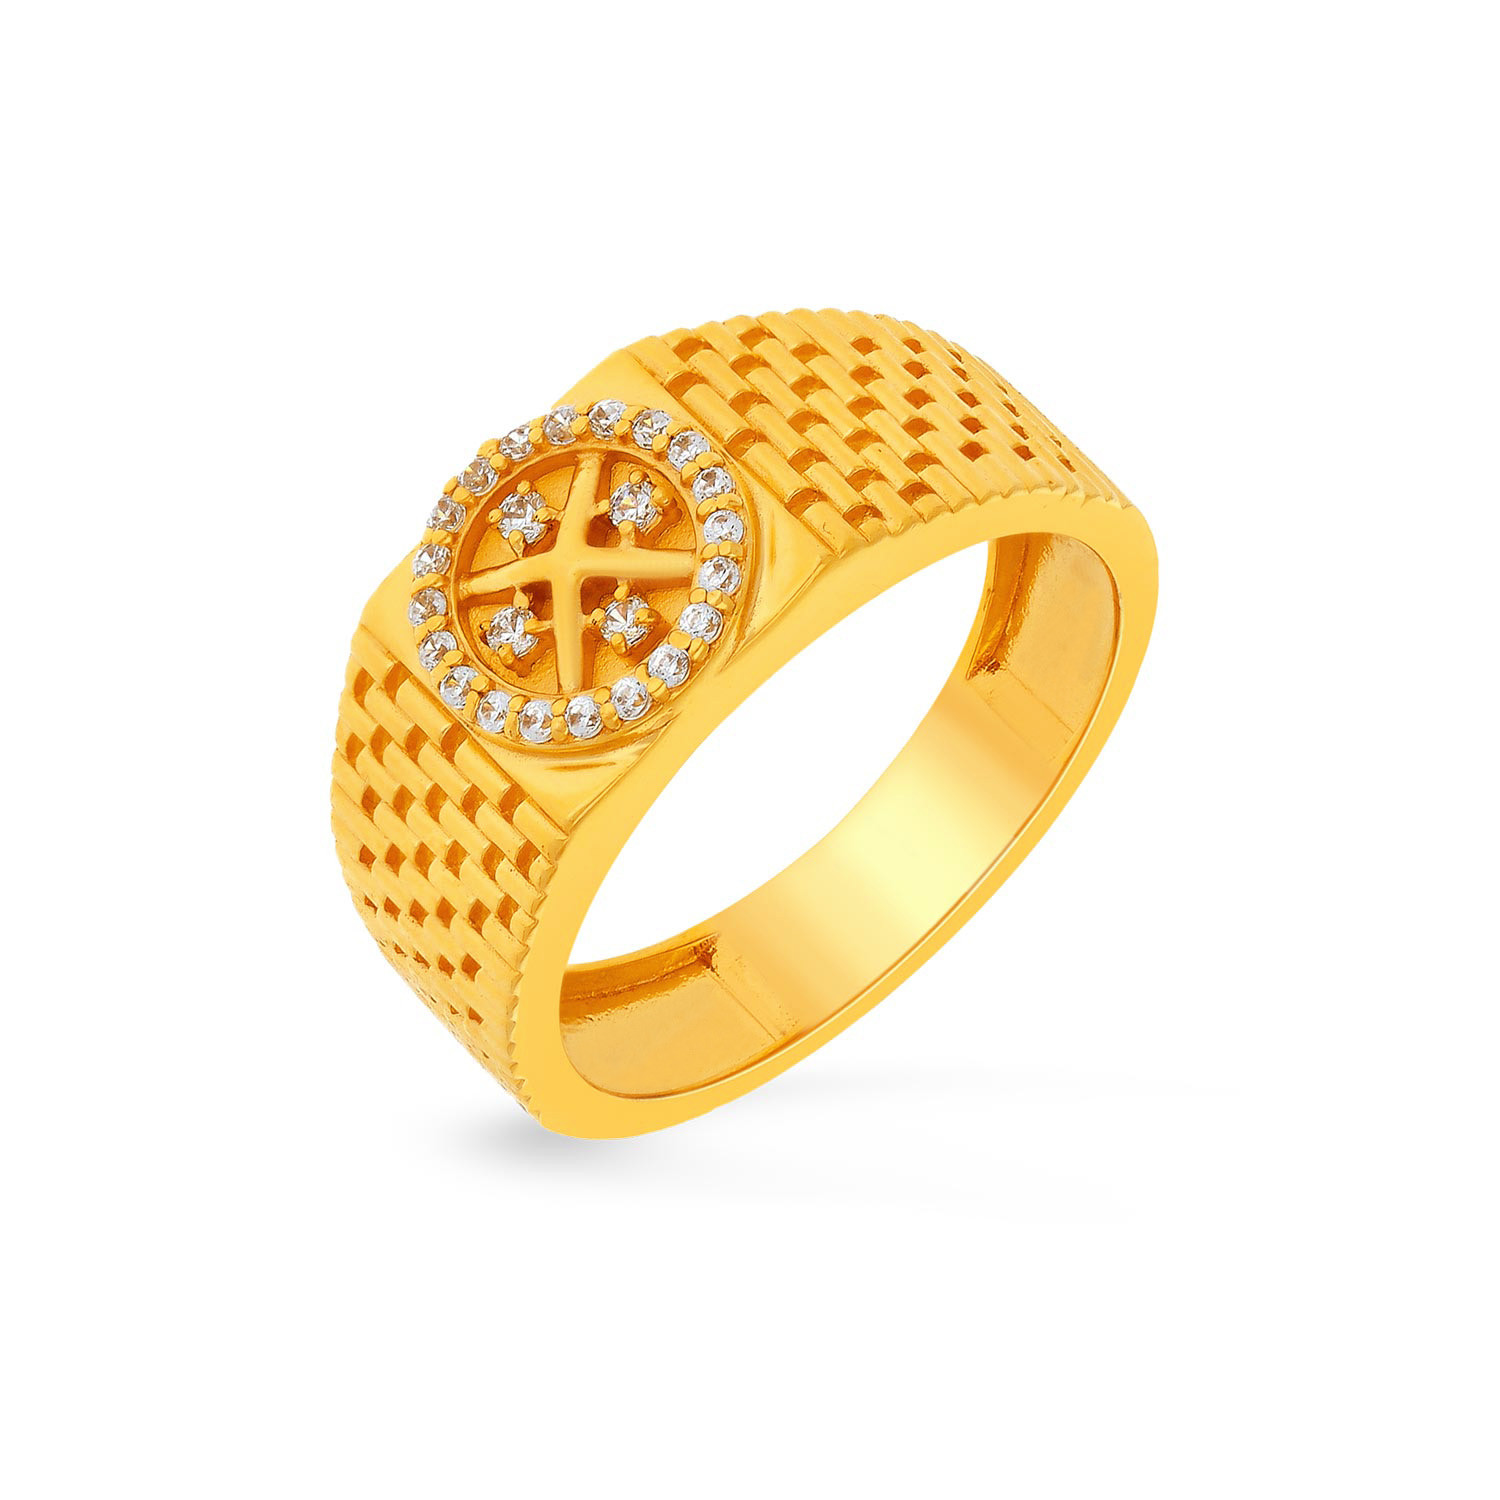 Buy Malabar Gold and Diamonds 22k Multicolor Gold Ring Online At Best Price  @ Tata CLiQ